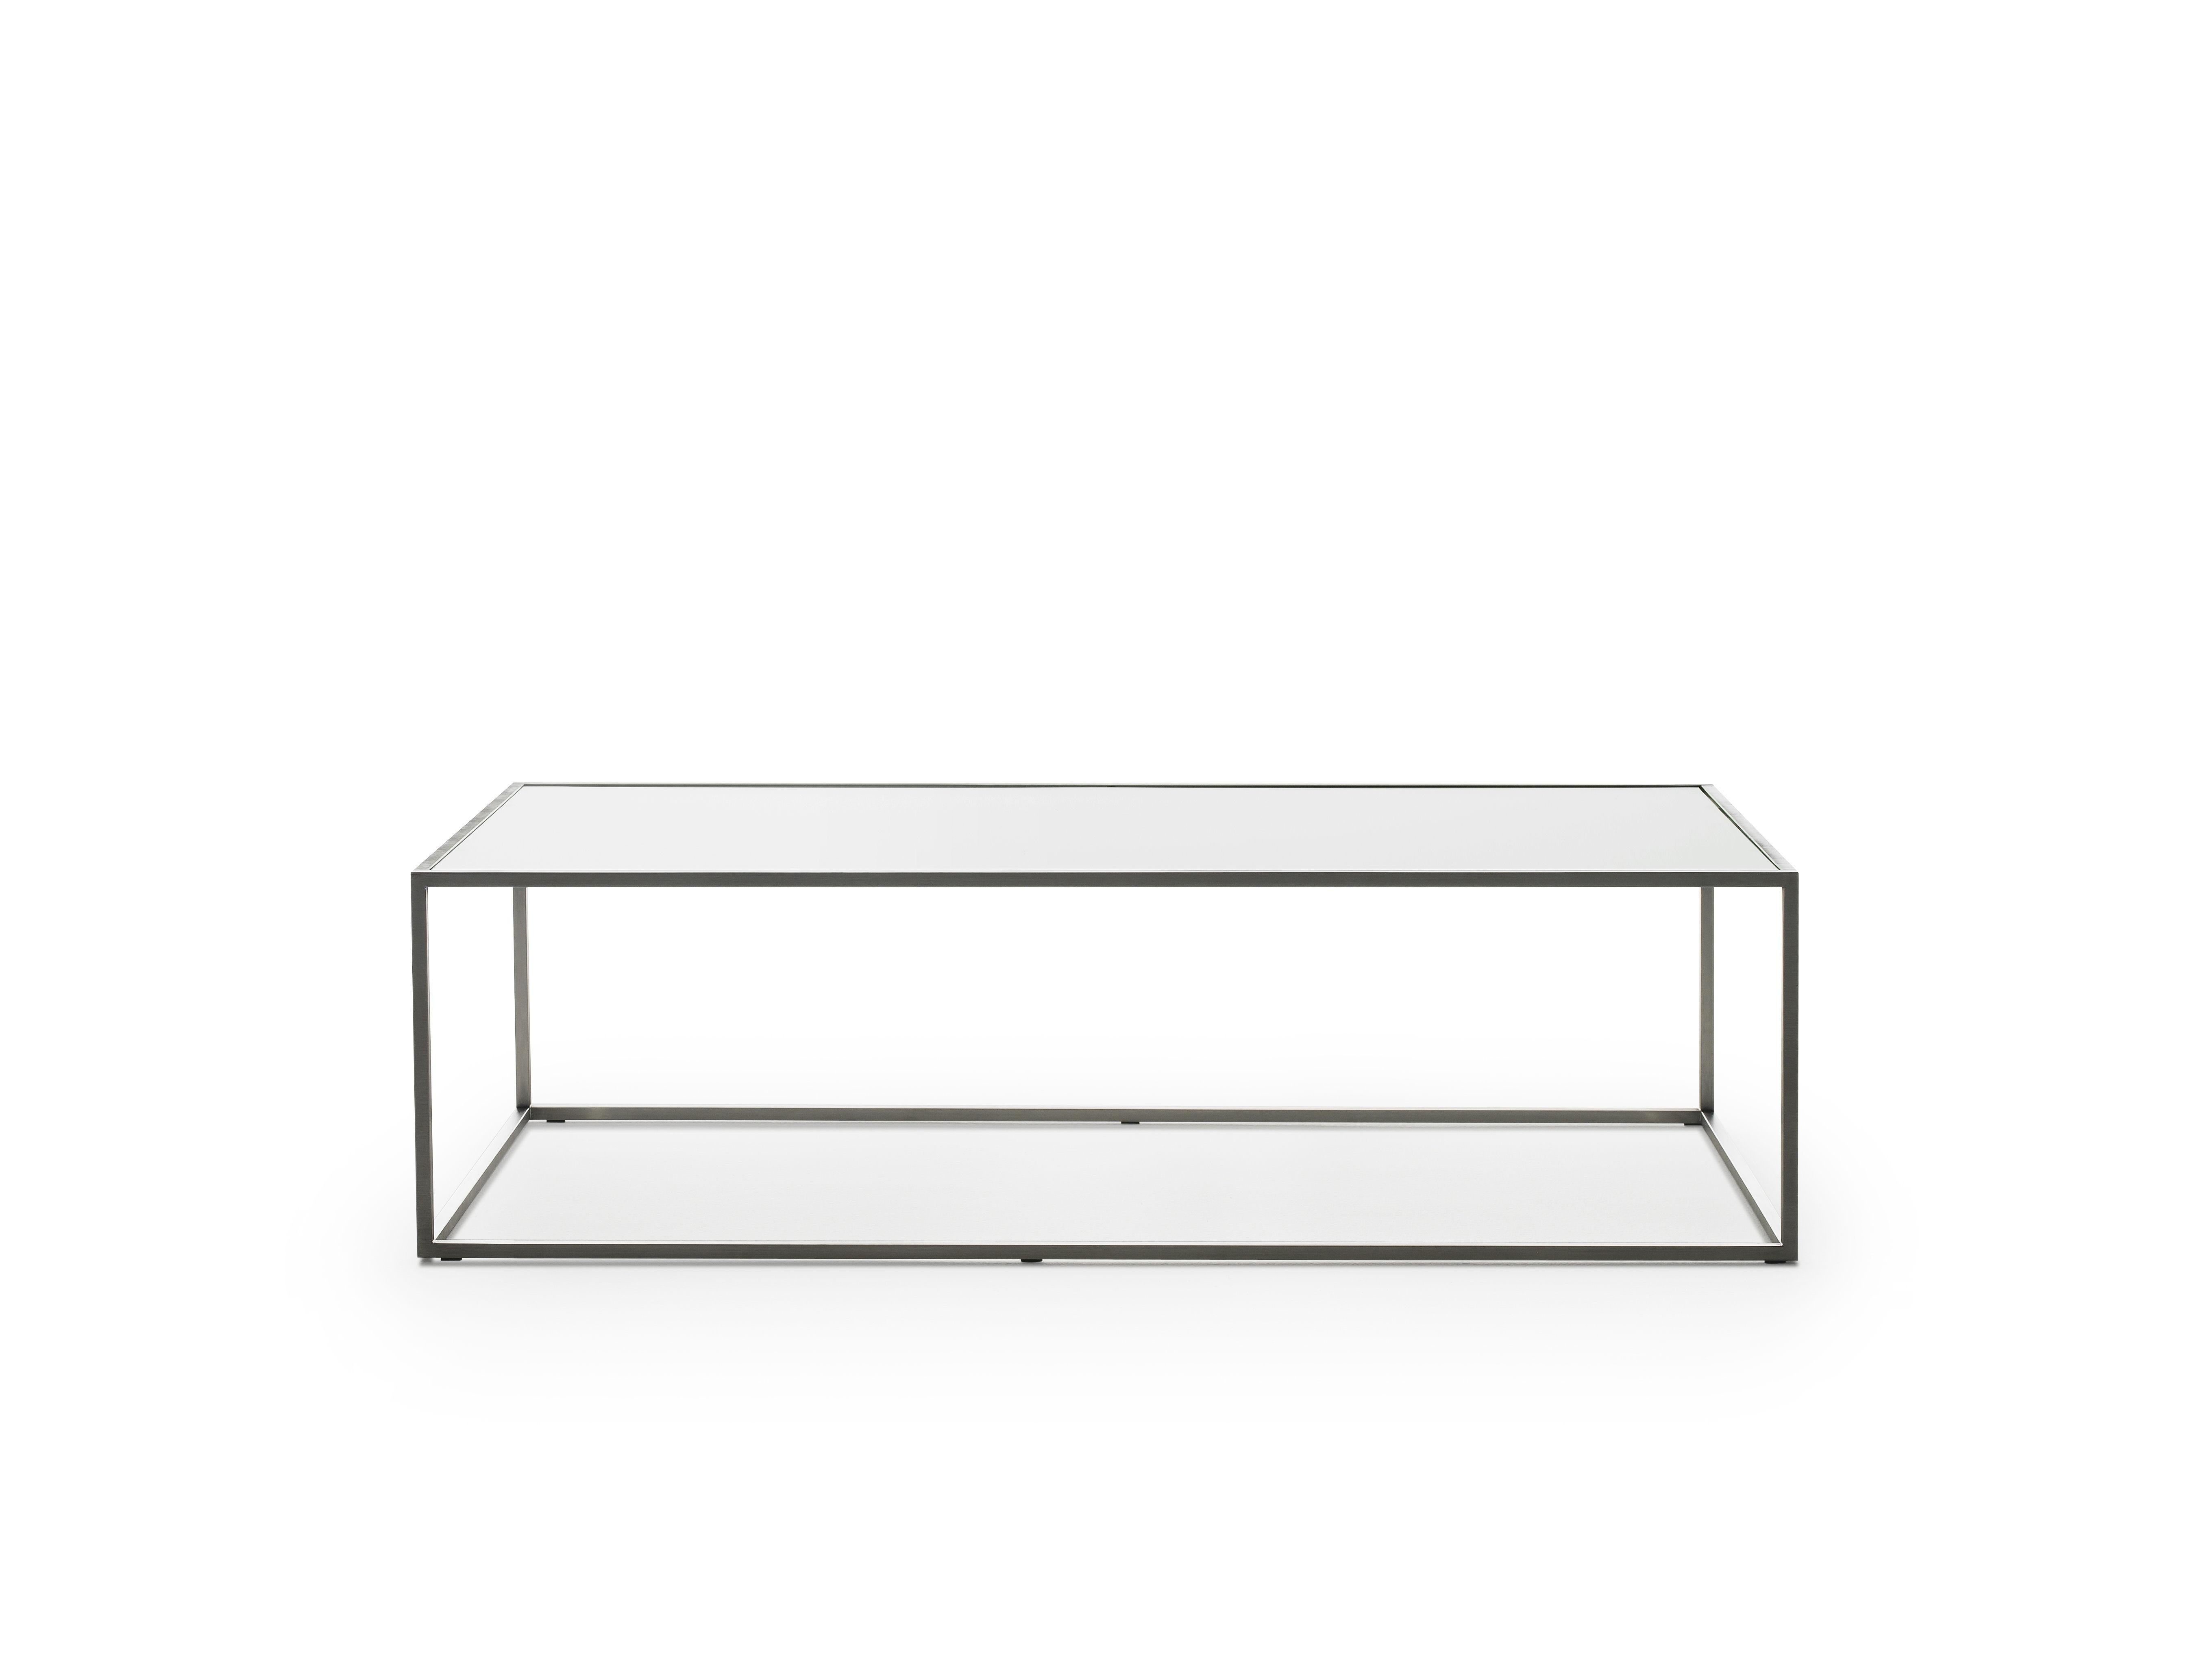 DS-9075 table by De Sede
Dimensions: D 65 x W 130 x H 38 cm
Materials: Four-point base, polished stainless steel, 10 mm Sekurit Floatglass

Prices may change according to the chosen materials and size. 

Exclusive living environments as the